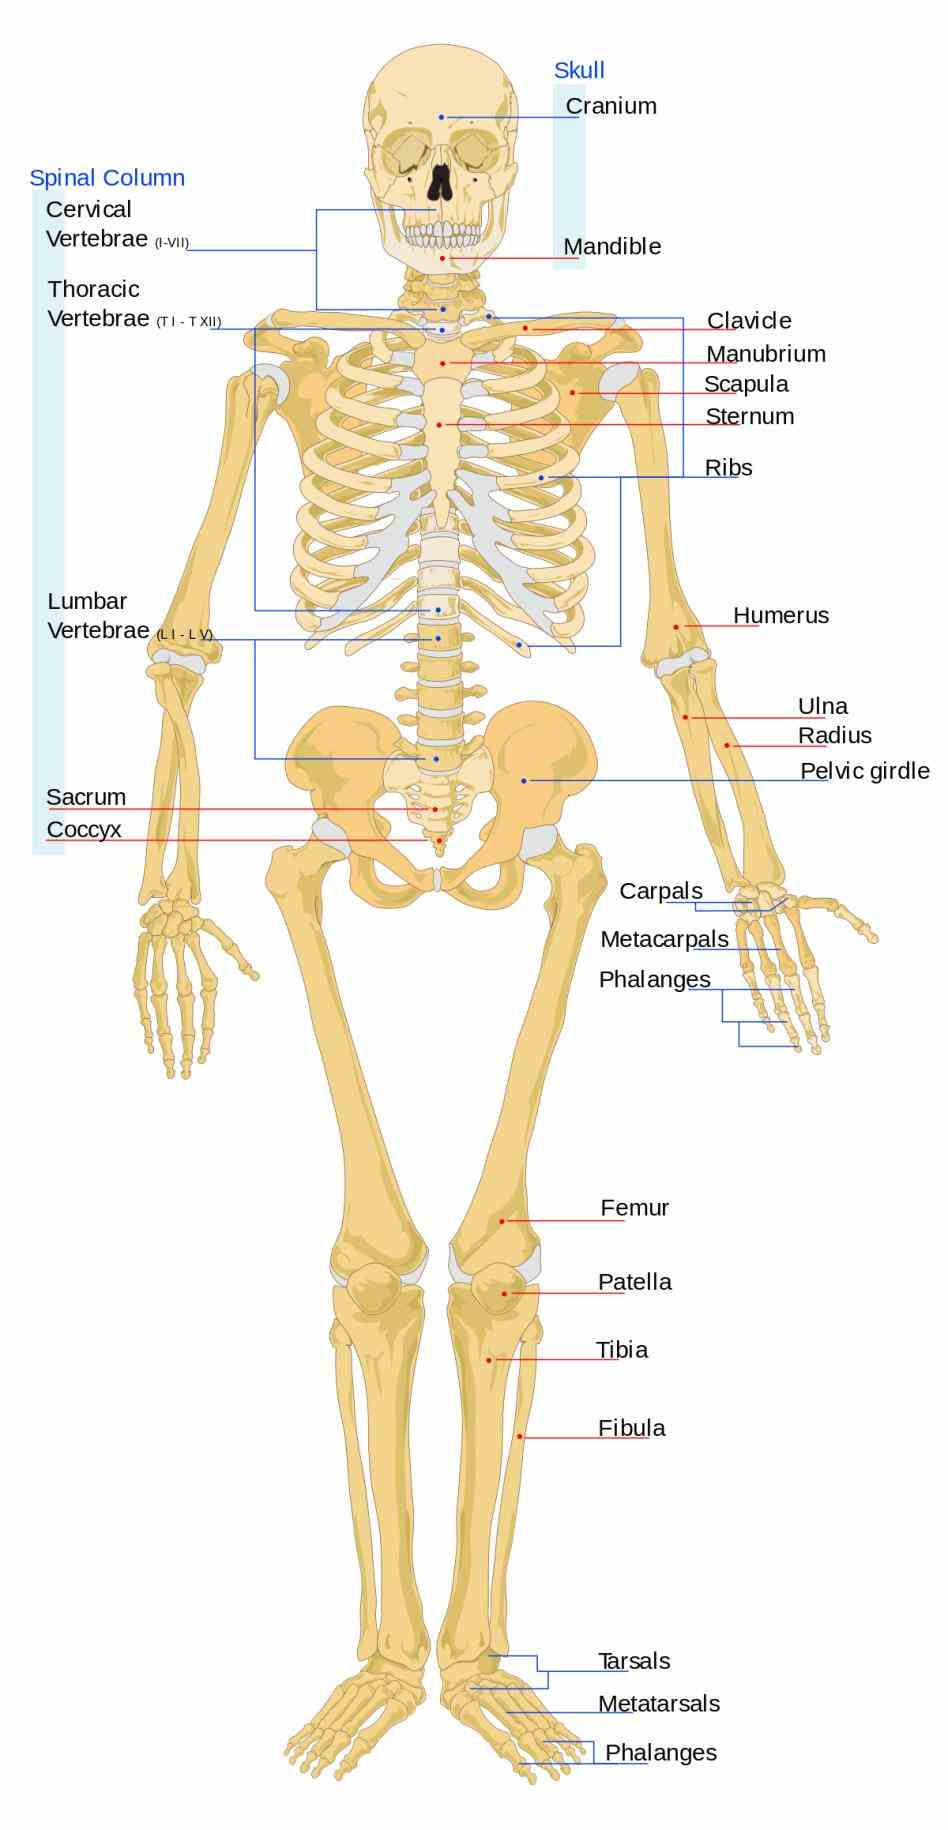 as body a Anatomy Of All Bones In The Human Body concise explantion on how the organs and different